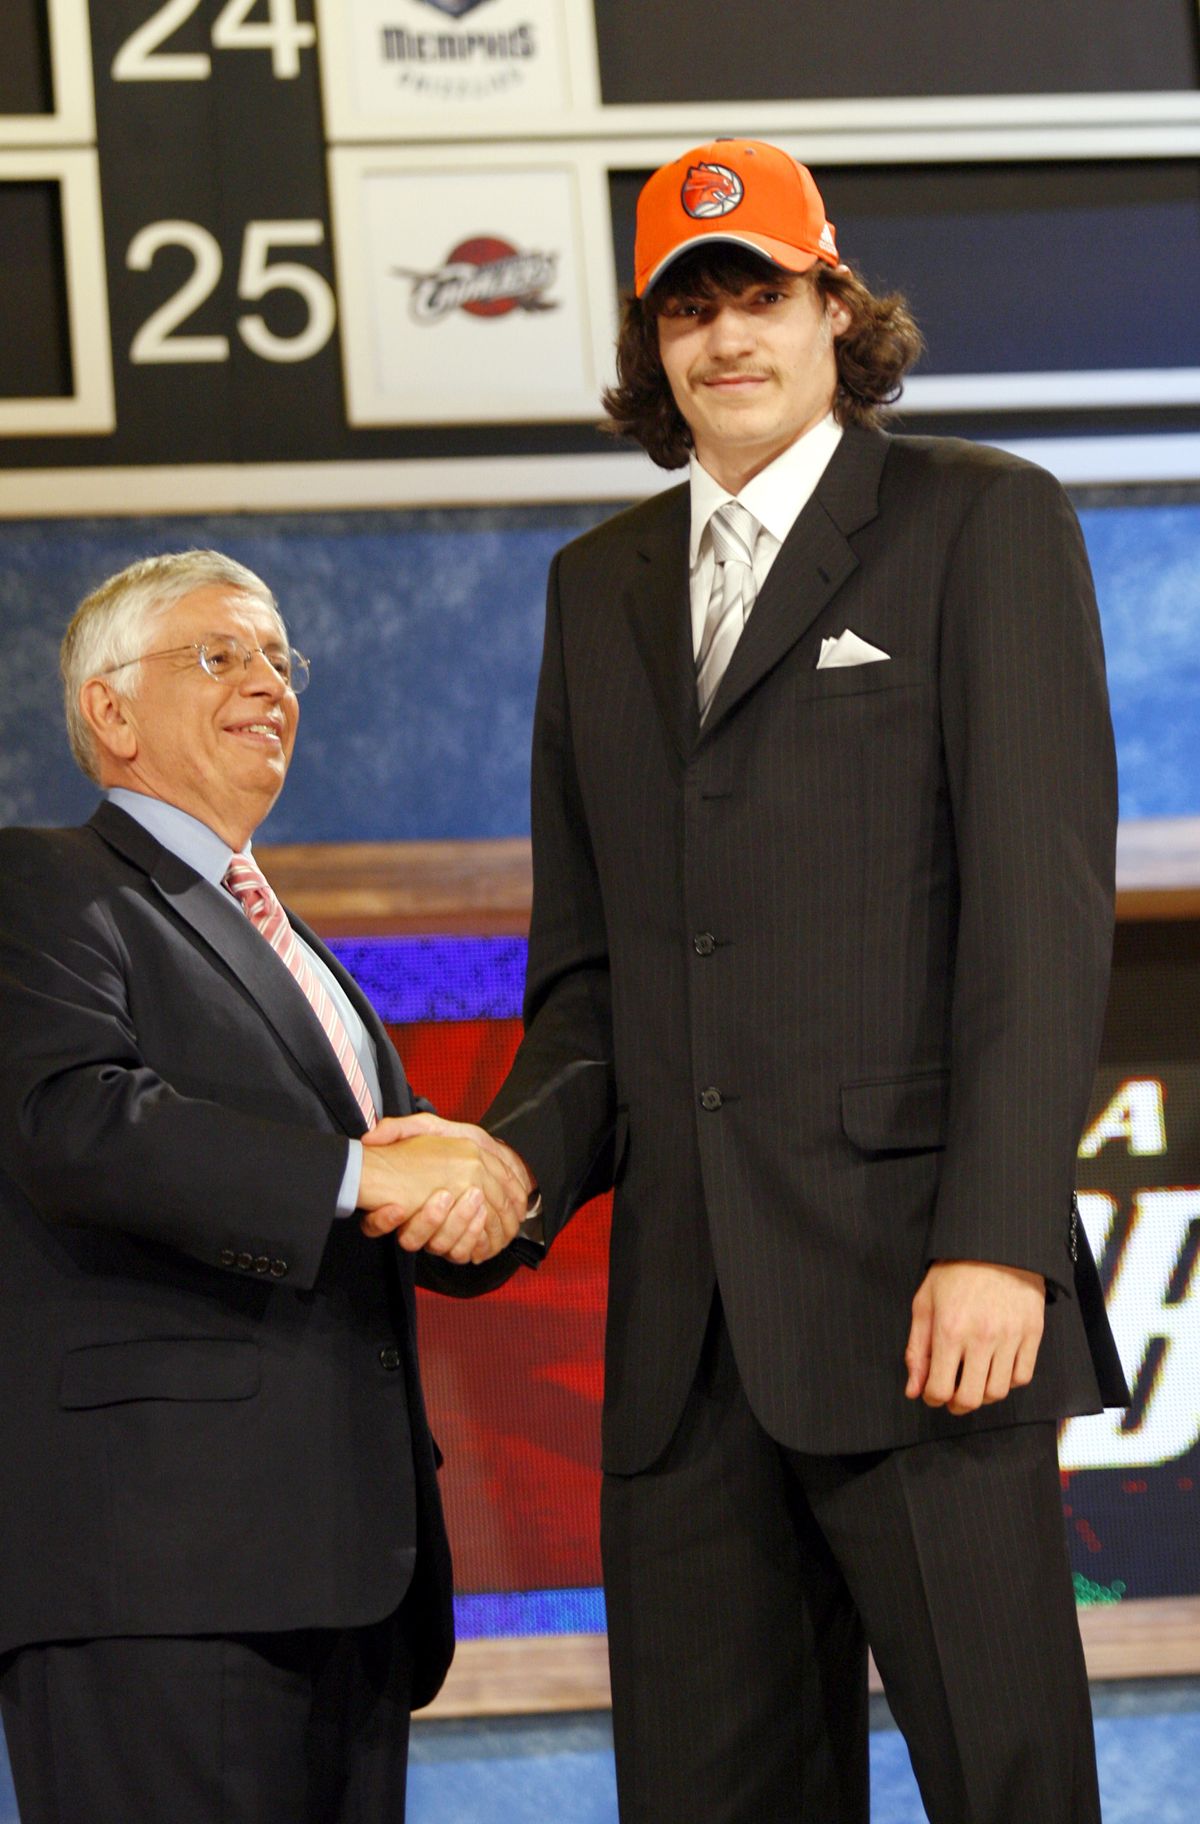 Adam Morrison, a forward from Gonzaga, poses for a photo with NBA Commissioner David Stern after he is chosen by the Charlotte Bobcats as the third overall pick of the 2006 NBA Draft Wednesday, June 28, 2006 at Madison Square Garden in New York.  (Associated Press)